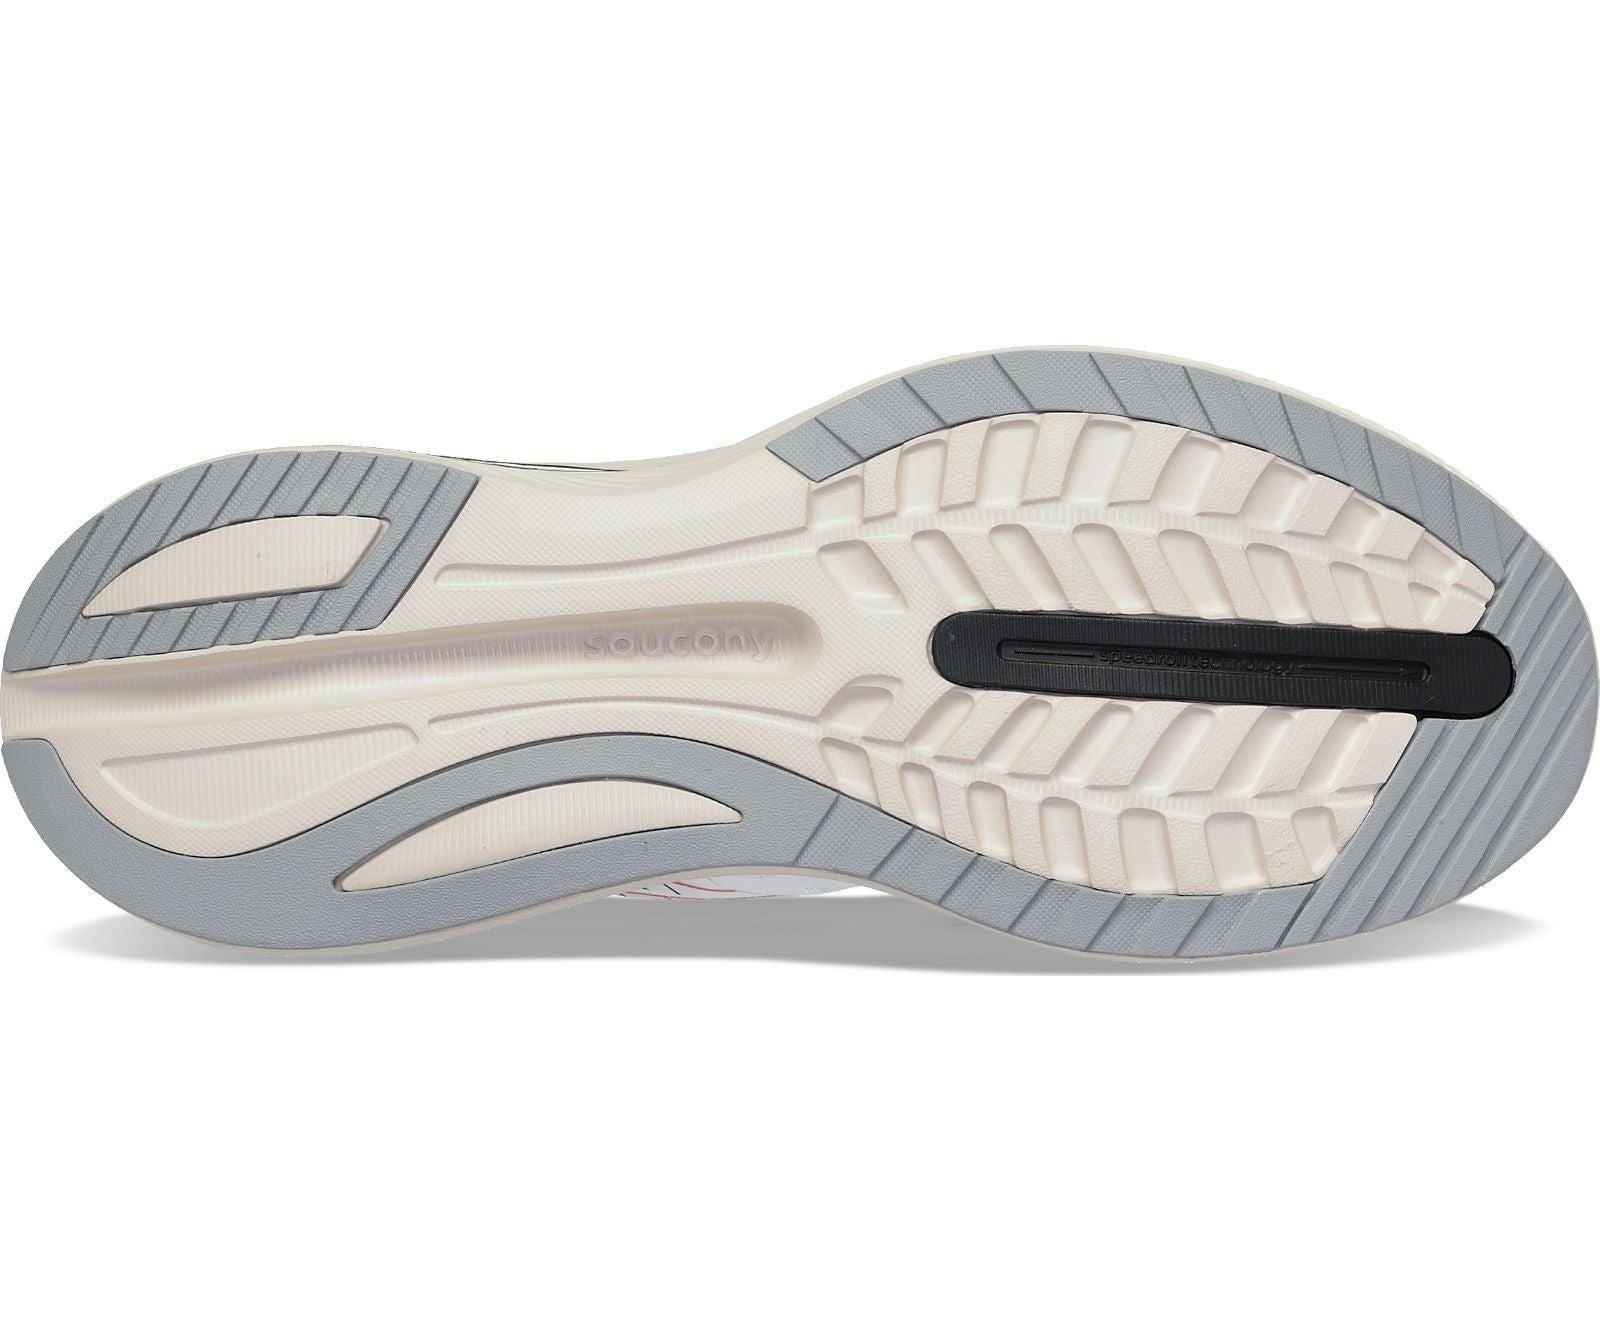 Bottom (outer sole) view of the Men's Endorphin Shift 3 by Saucony in the color White/Sand